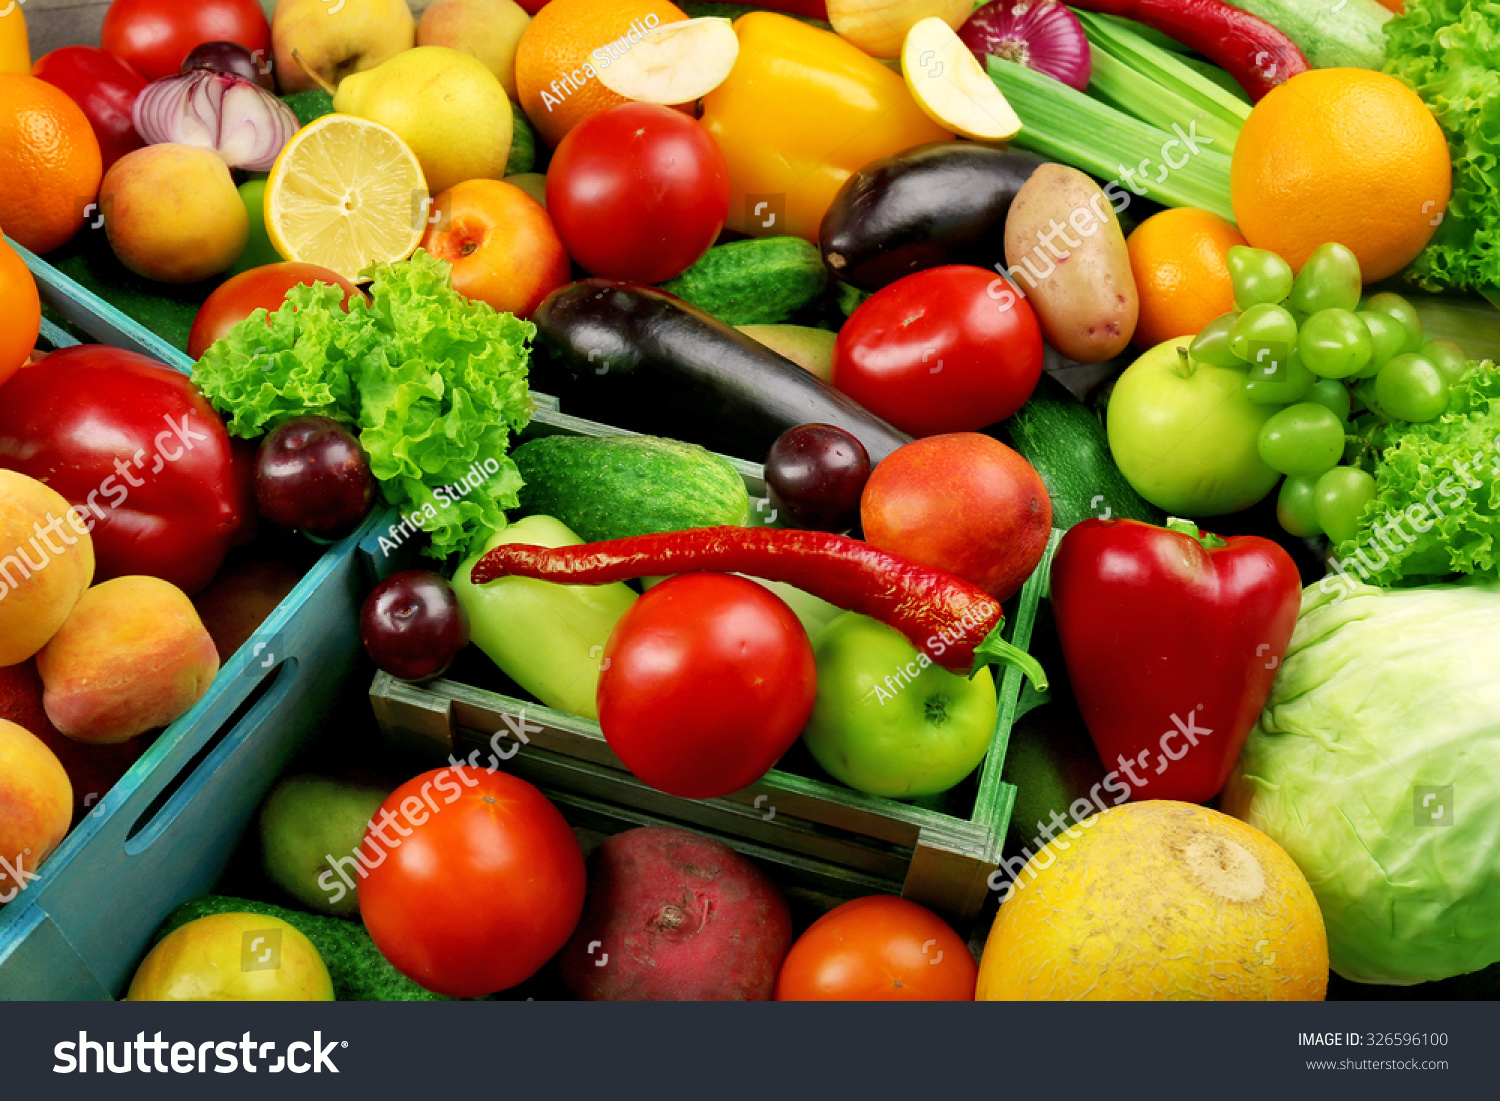 Heap Of Fresh Fruits And Vegetables Close Up Stock Photo 326596100 ...